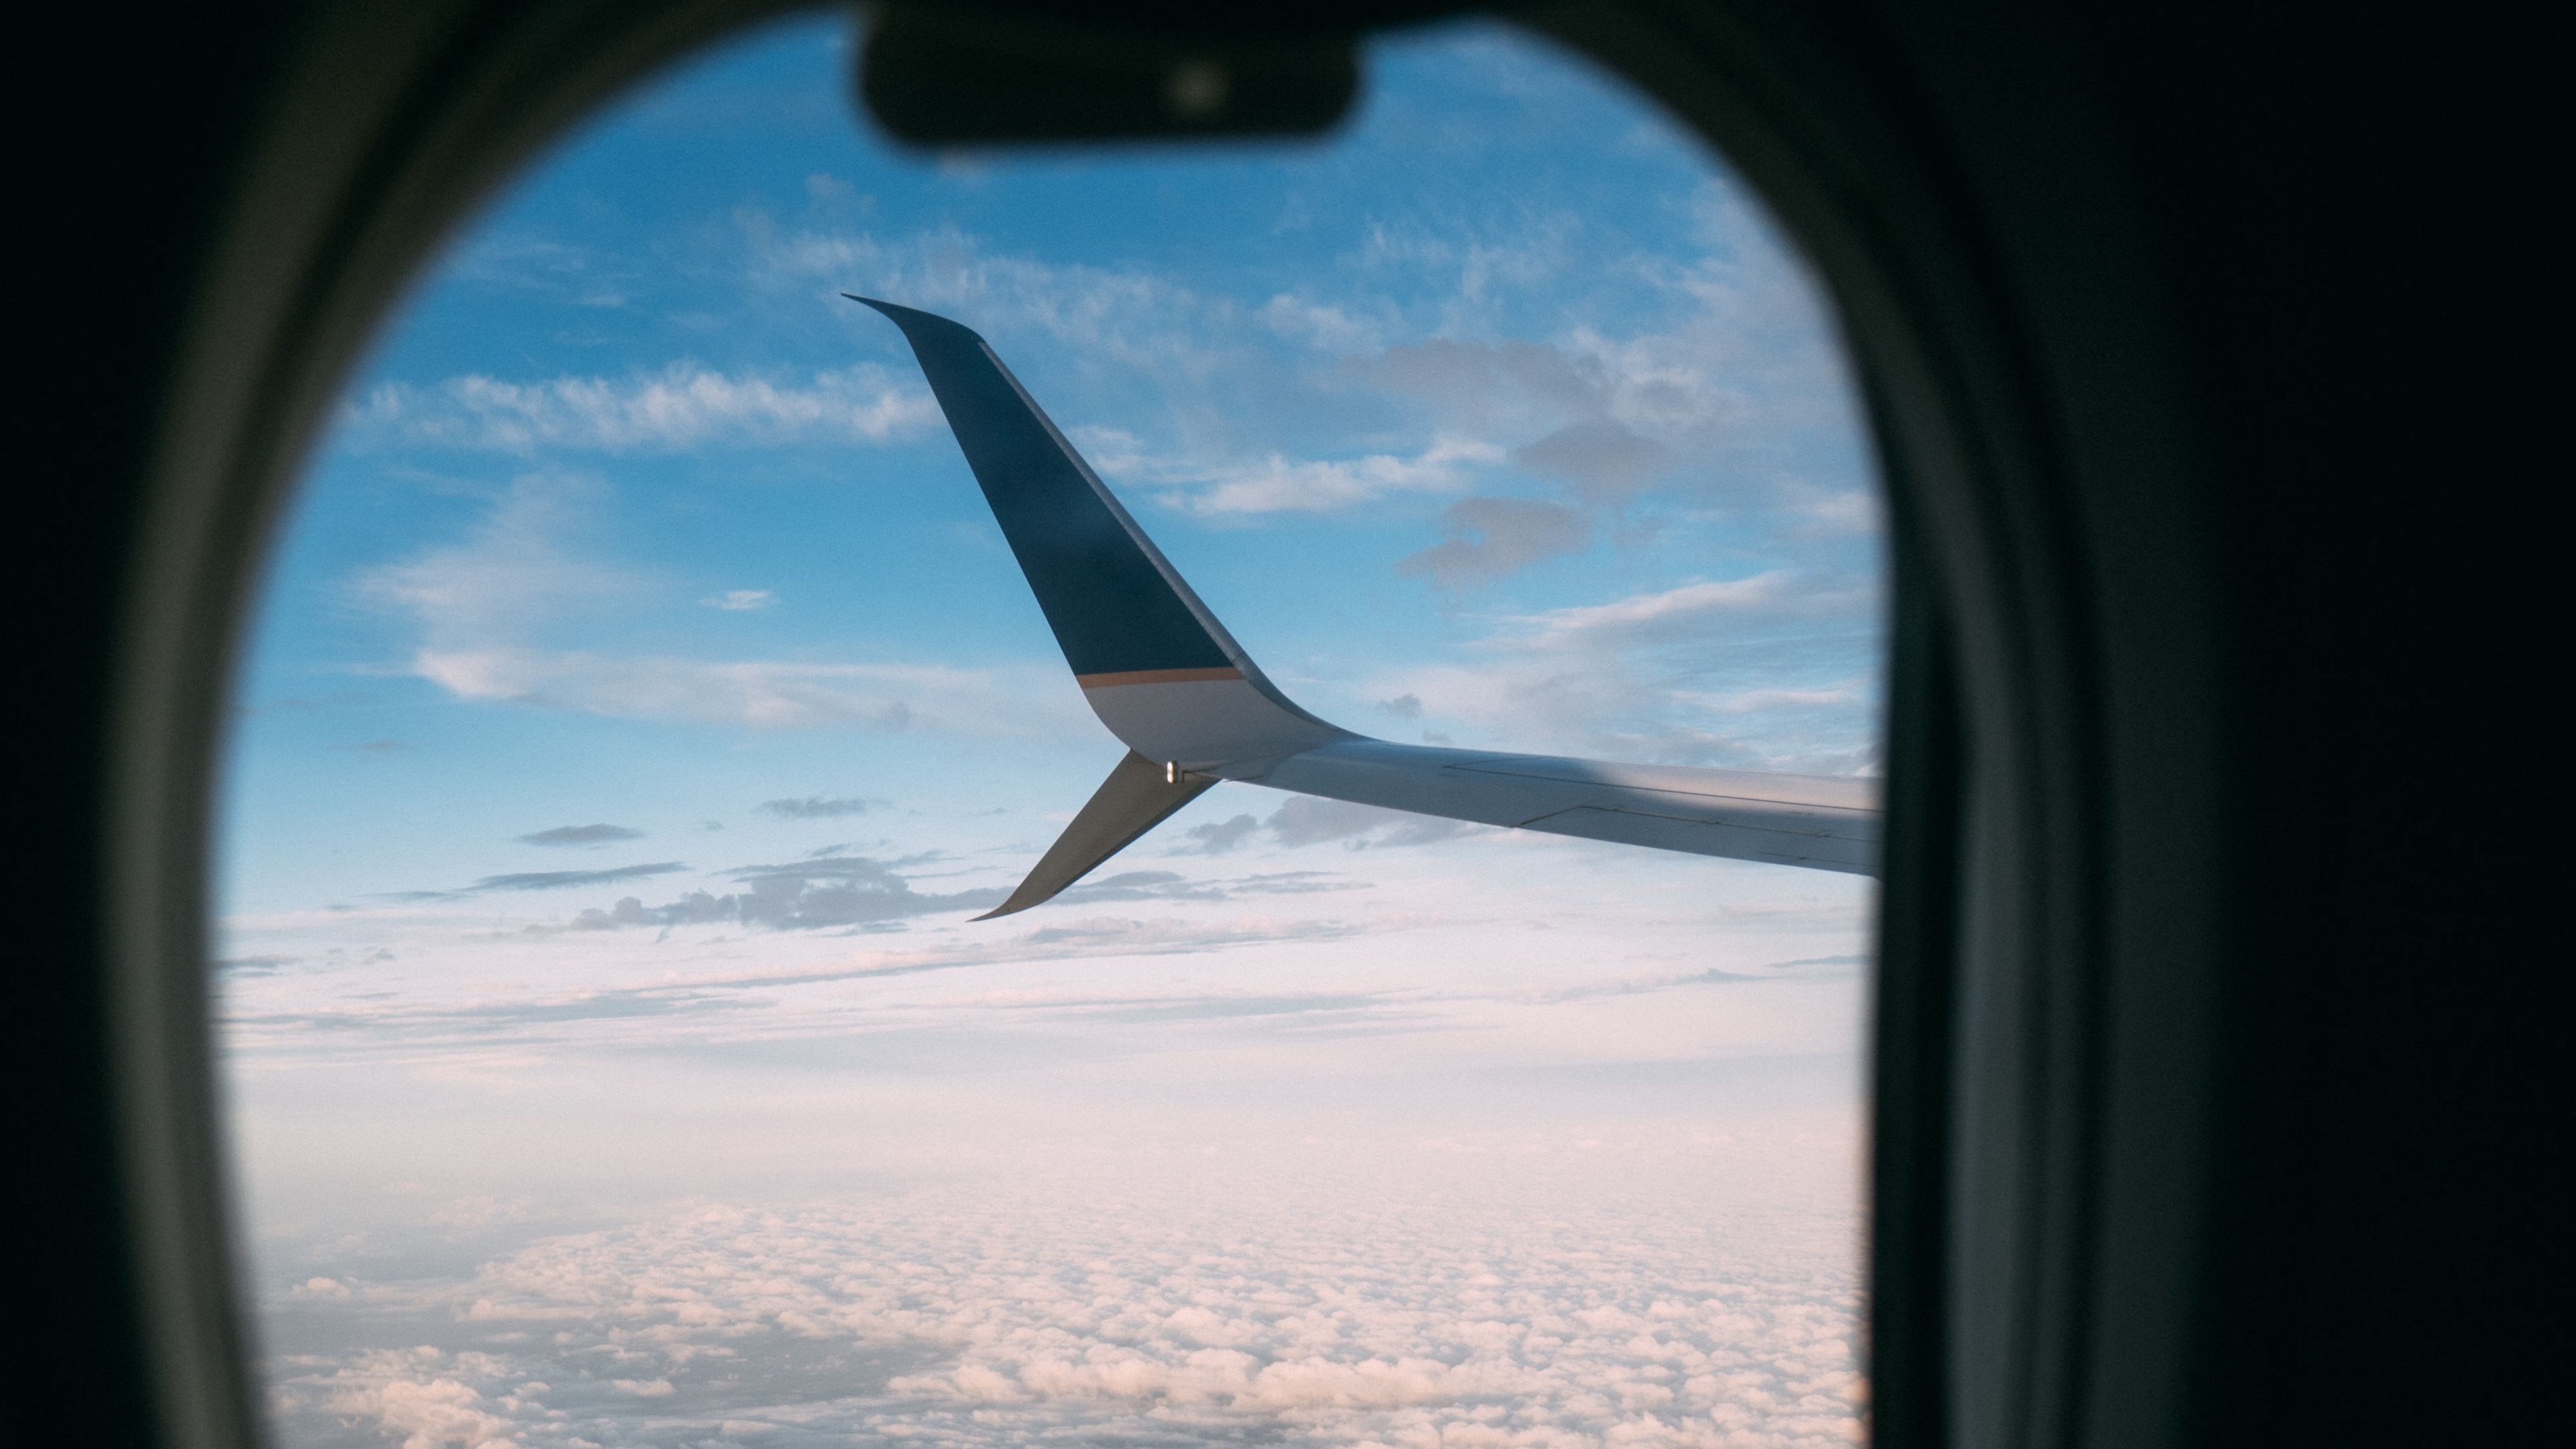 Download wallpaper 3840x2160 plane, wing, porthole, view, clouds 4k uhd ...